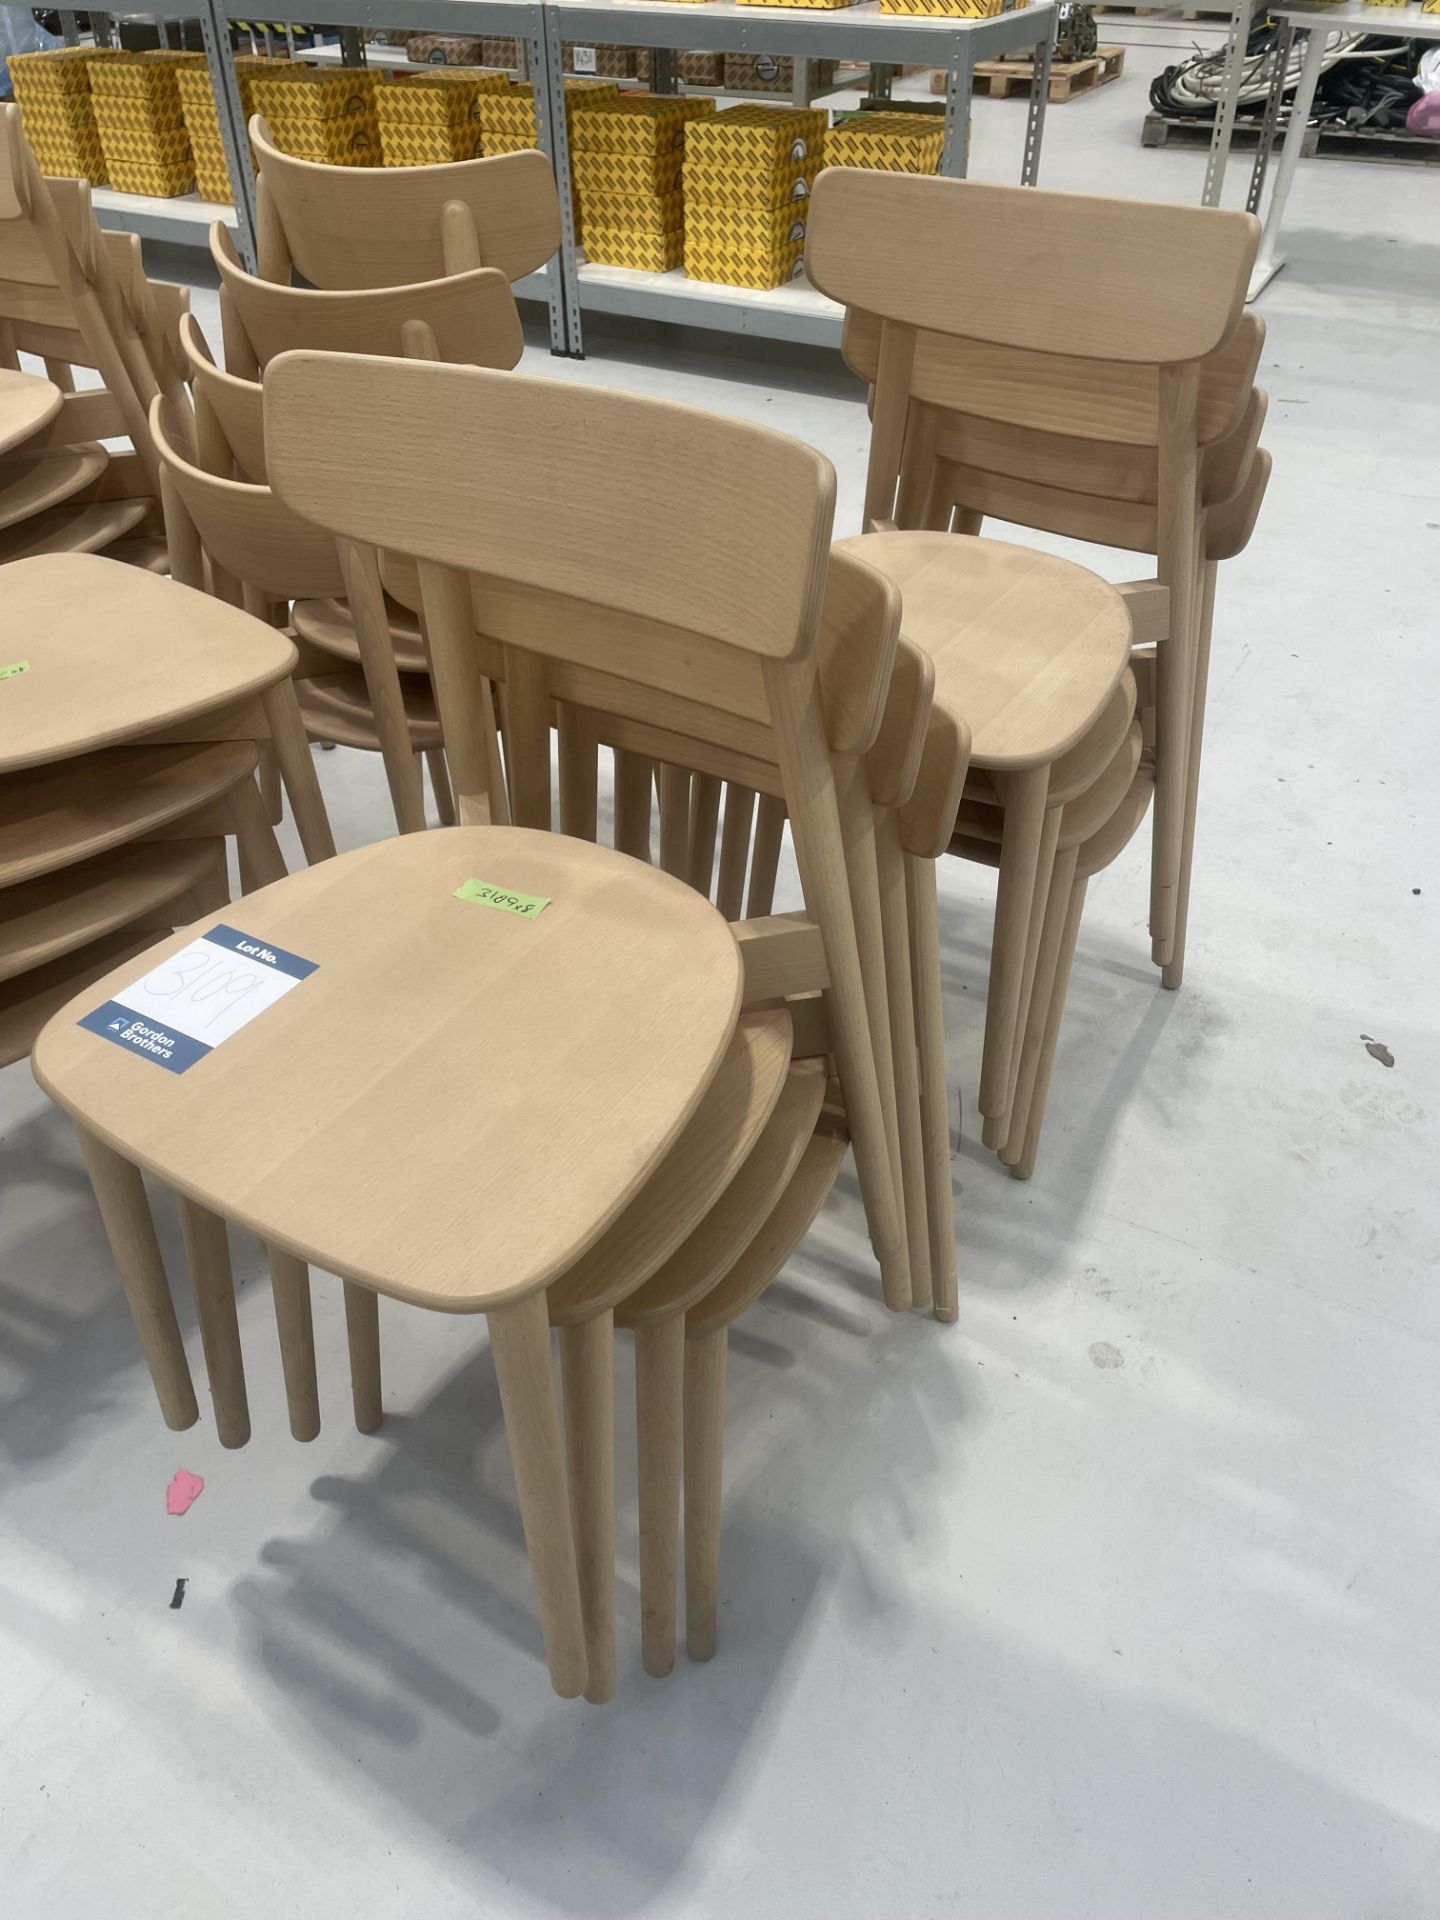 8x (no.) wooden stacking chairs